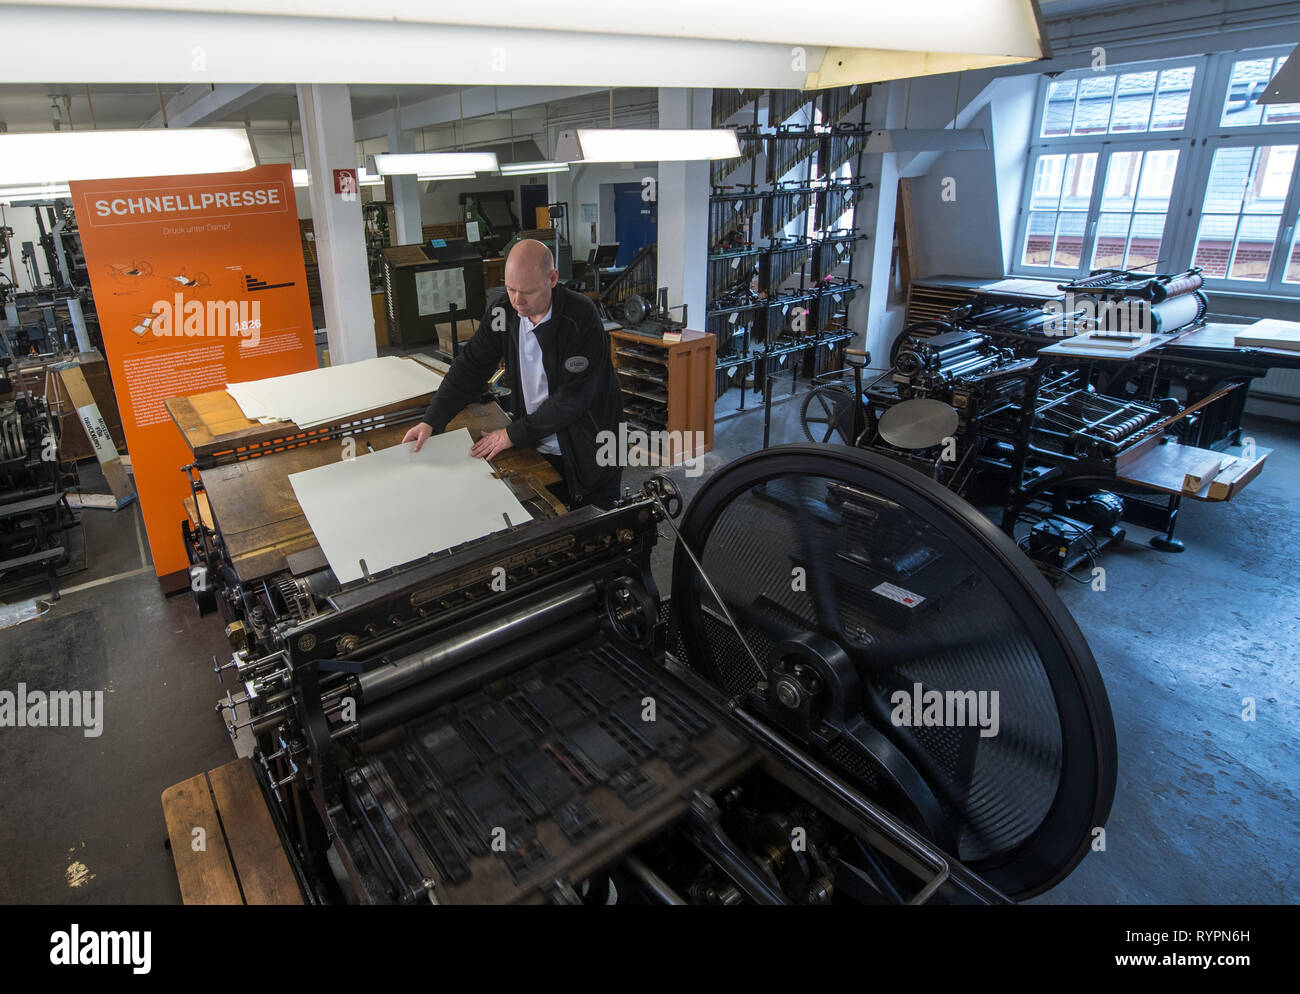 14 March 2019, Saxony, Leipzig: Thomas Kurz, typesetter and employee of the Museum für Druckkunst Leipzig, prints on a letterpress from 1906. The rooms of the historic printing workshop breathe 500 years of printing history with about 100 functioning machines and presses for historical casting, typesetting and printing techniques. On Friday (15.03.2019), the museum will participate in the first nationwide Print Art Day and offer a colourful programme. On 15 March last year, the artistic printing techniques were included in the German Unesco Commission's nationwide list of Intangible Cultural H Stock Photo